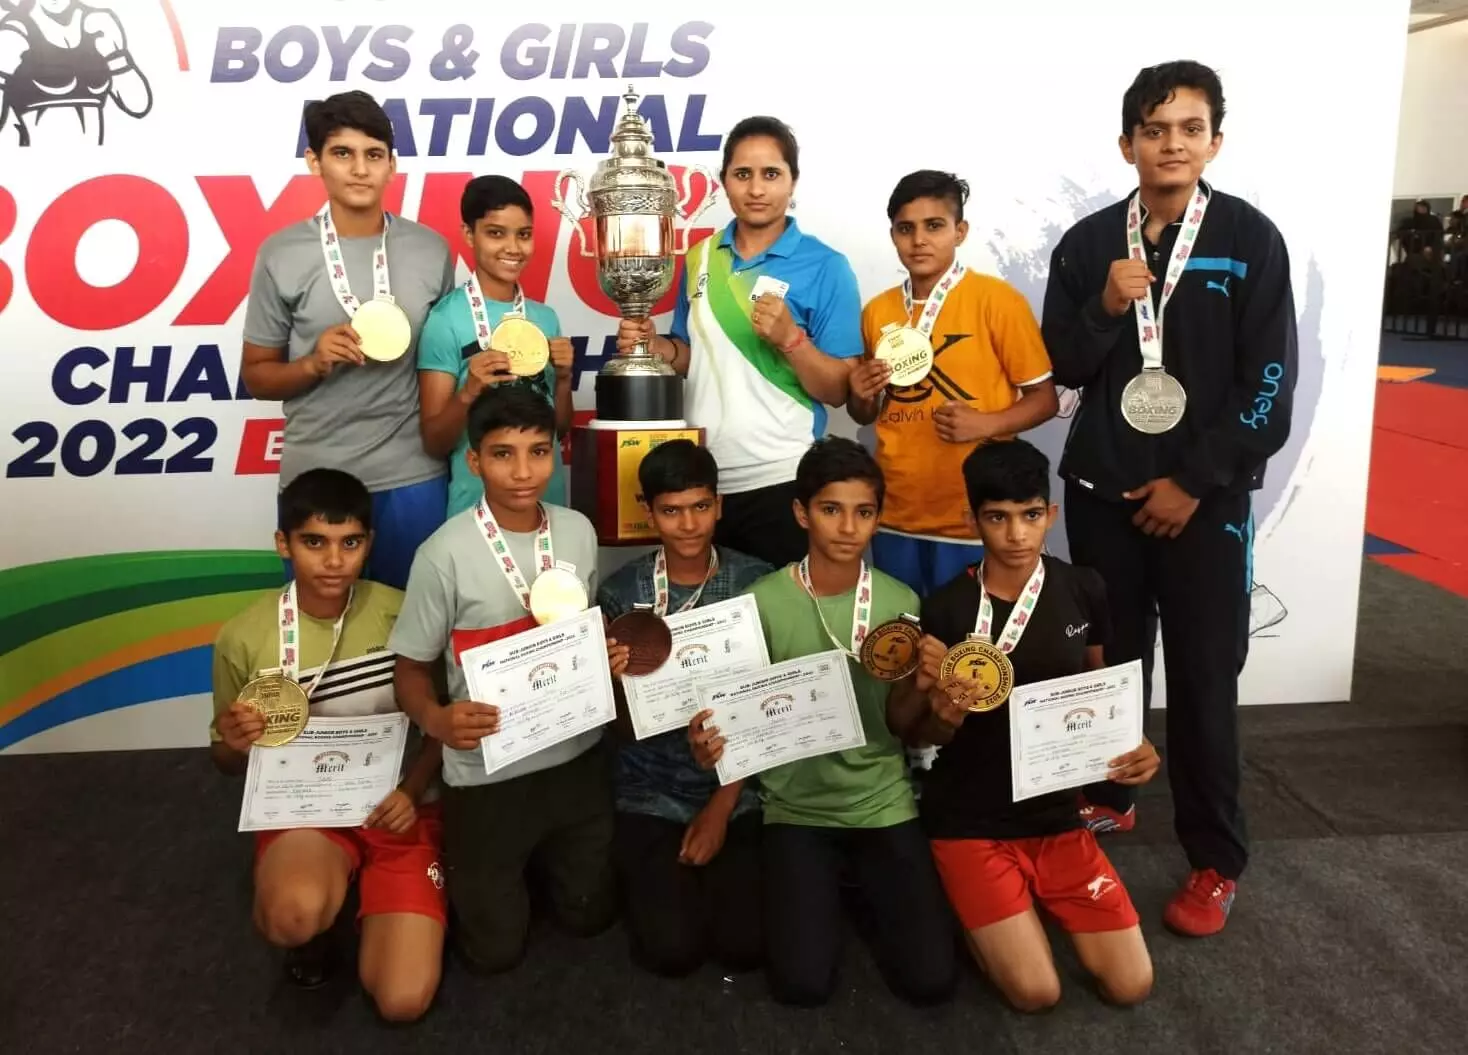 Haryana boxers pose with girls championships trophy